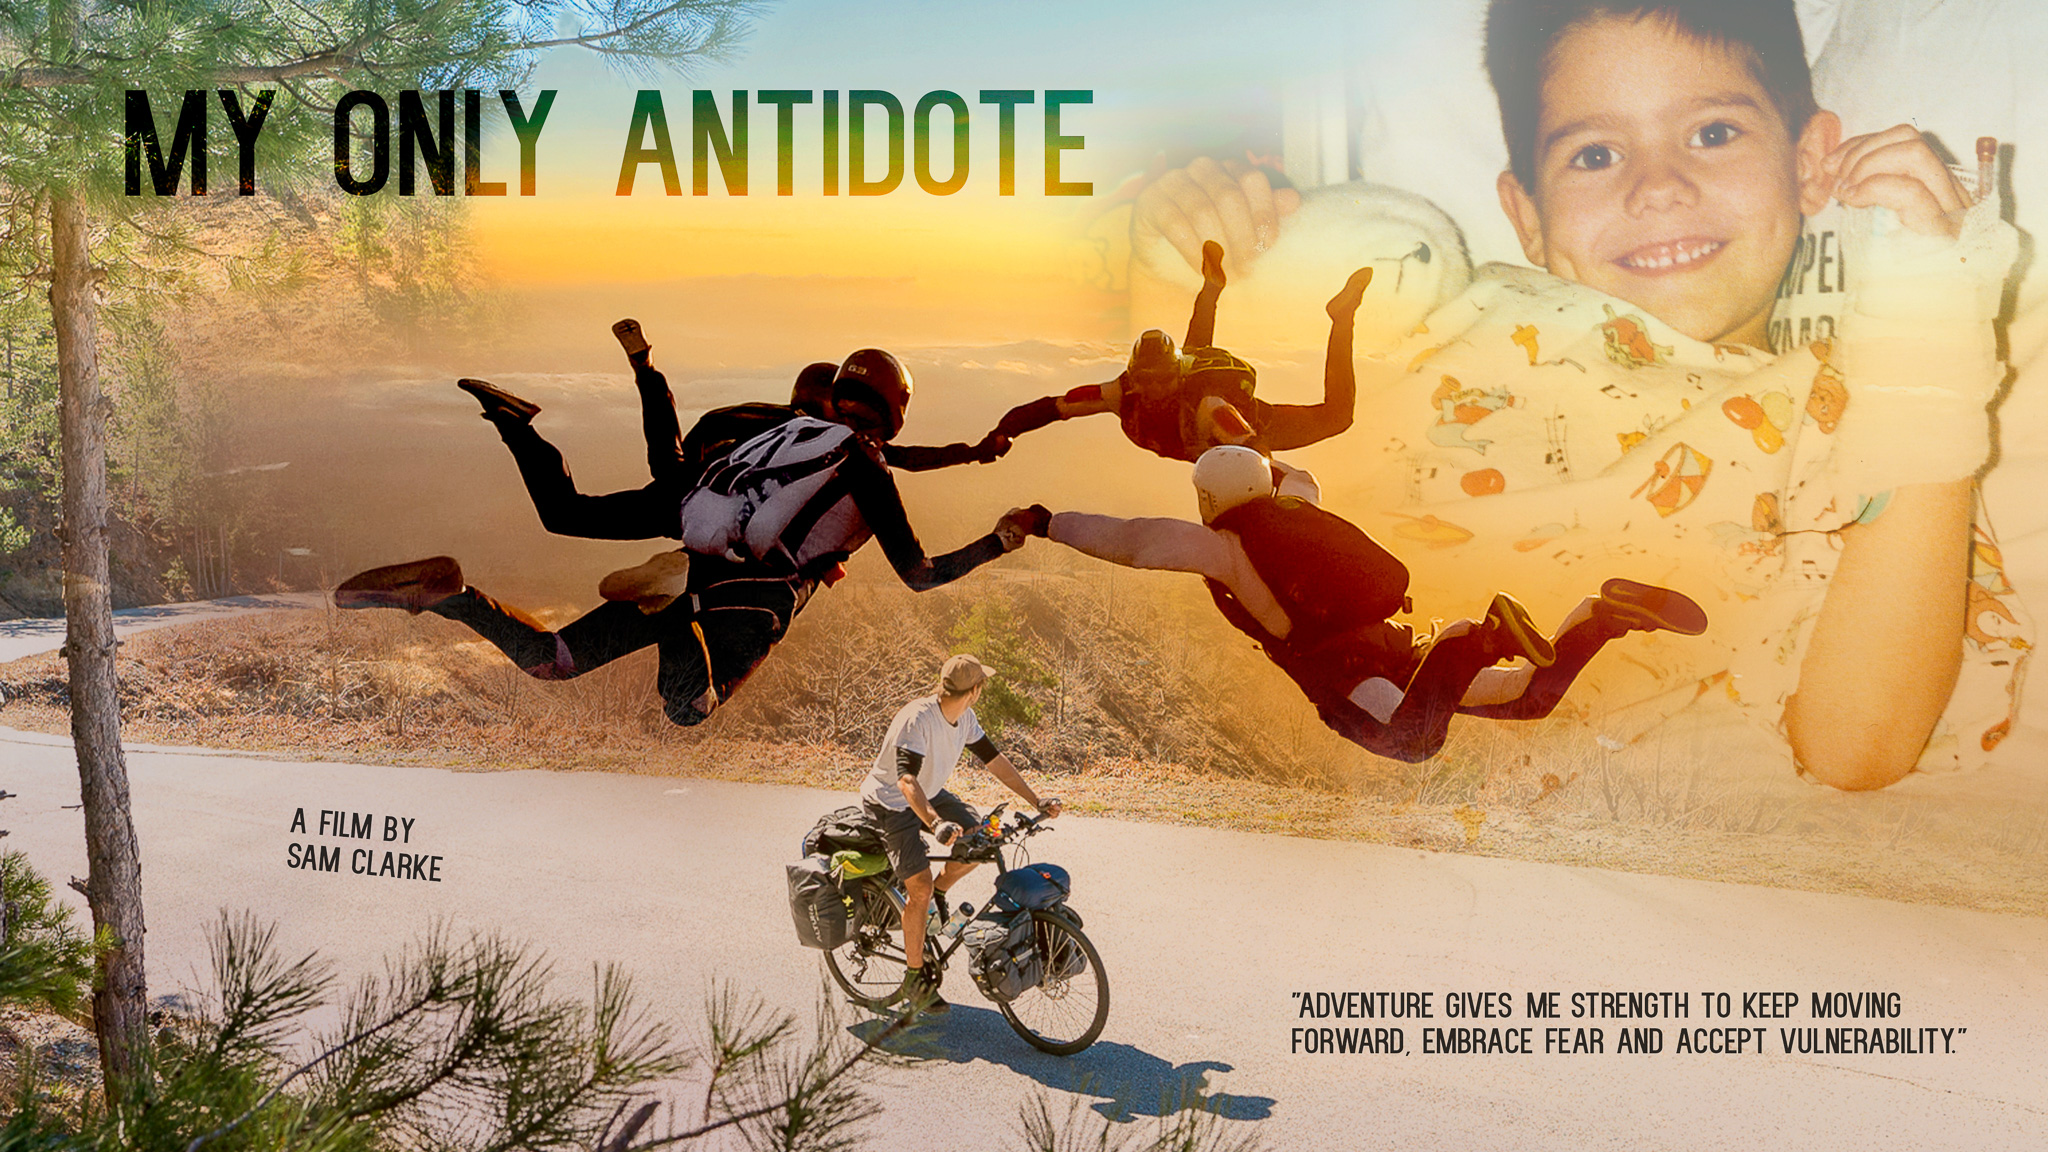 My Only Antidote (Trailer #1)